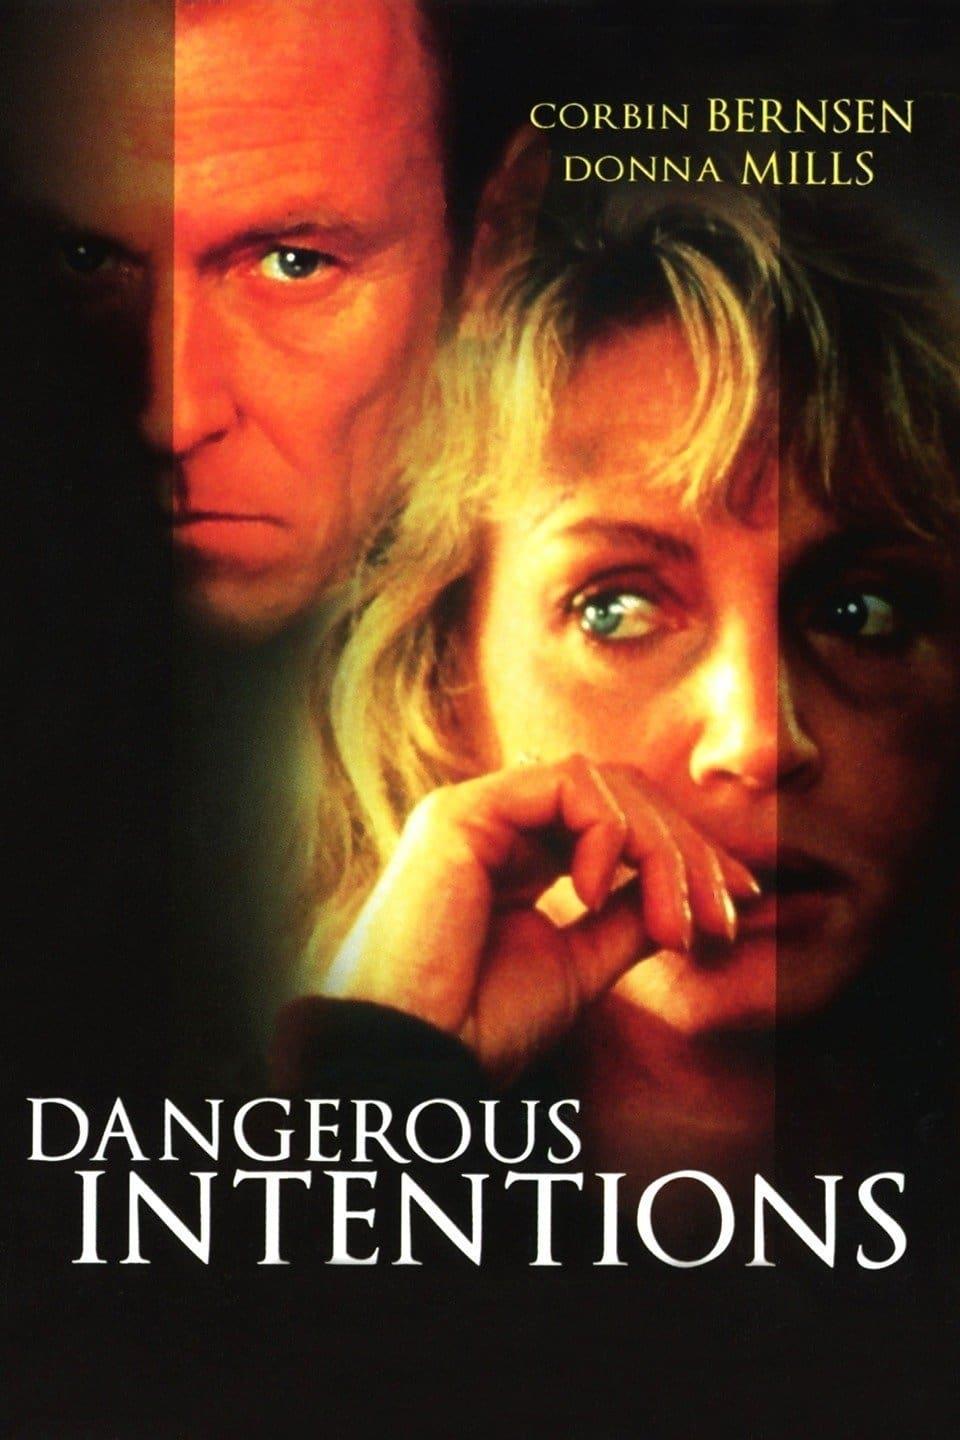 Dangerous Intentions poster